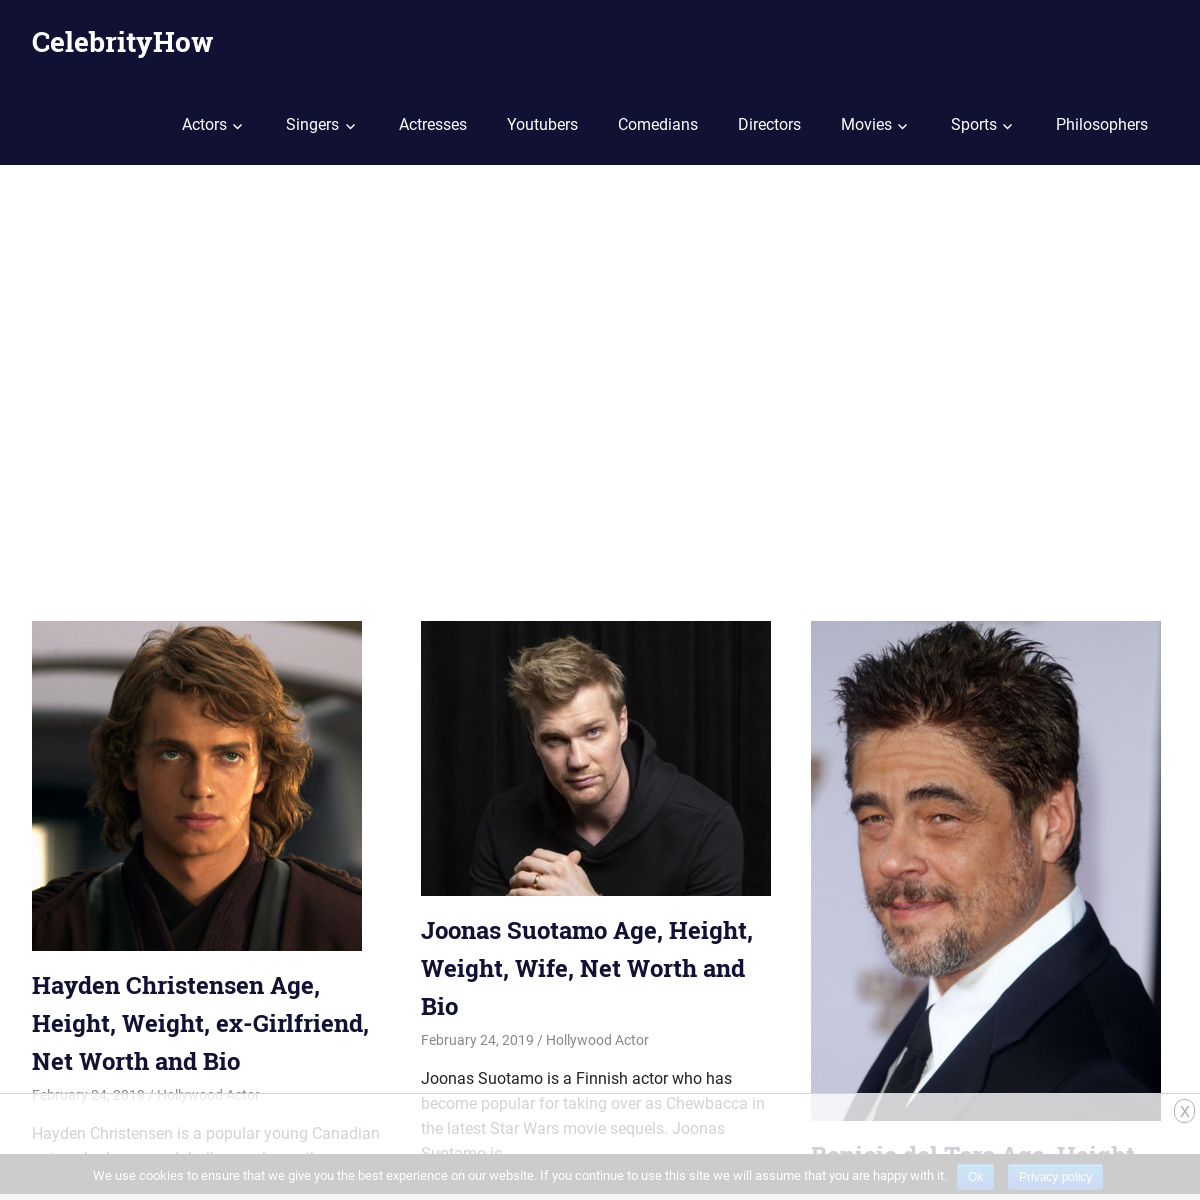 A complete backup of celebrityhow.com